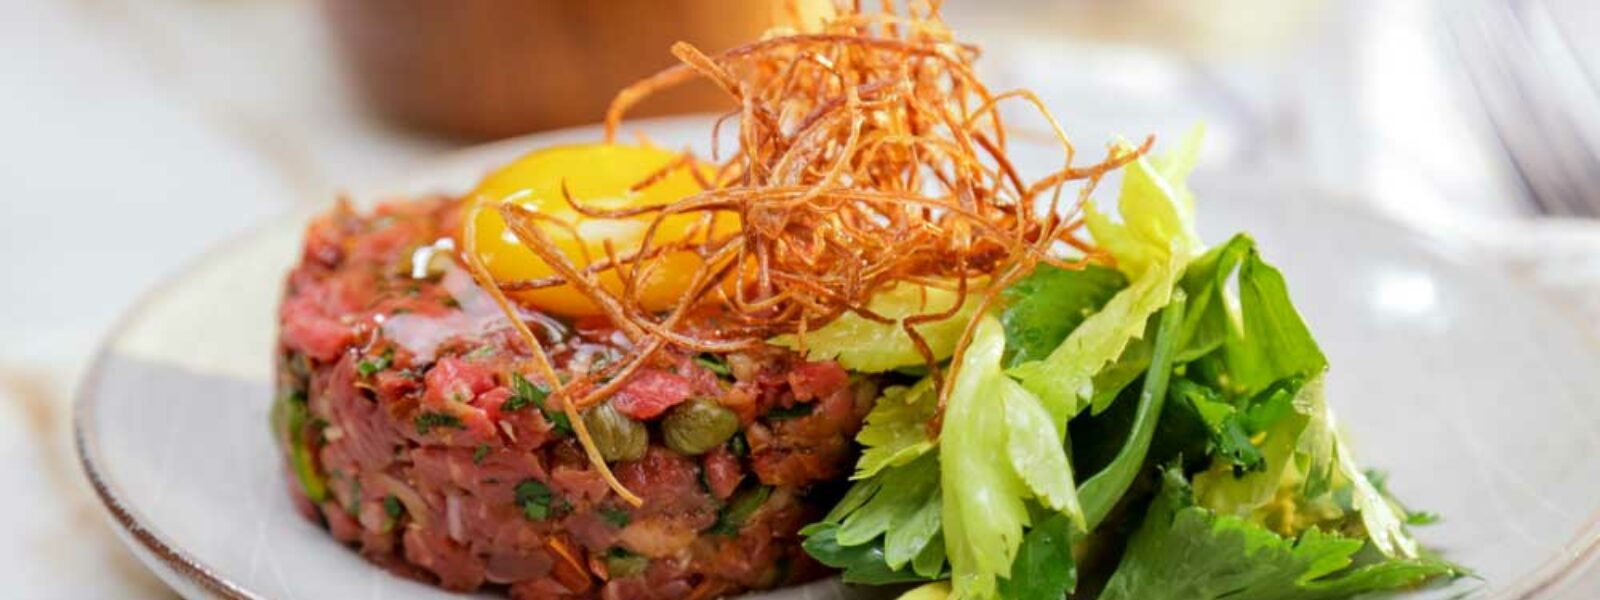 Recipe: Beef Tartare with Frizzled Shallots